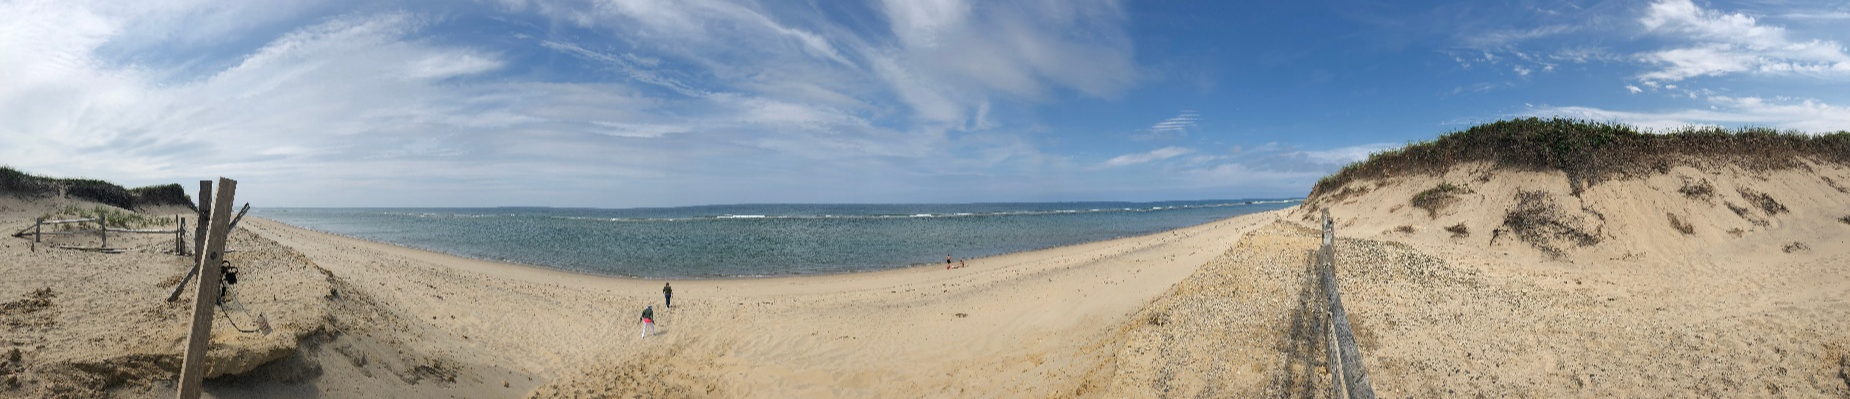 panoramic view of a beach and ocean